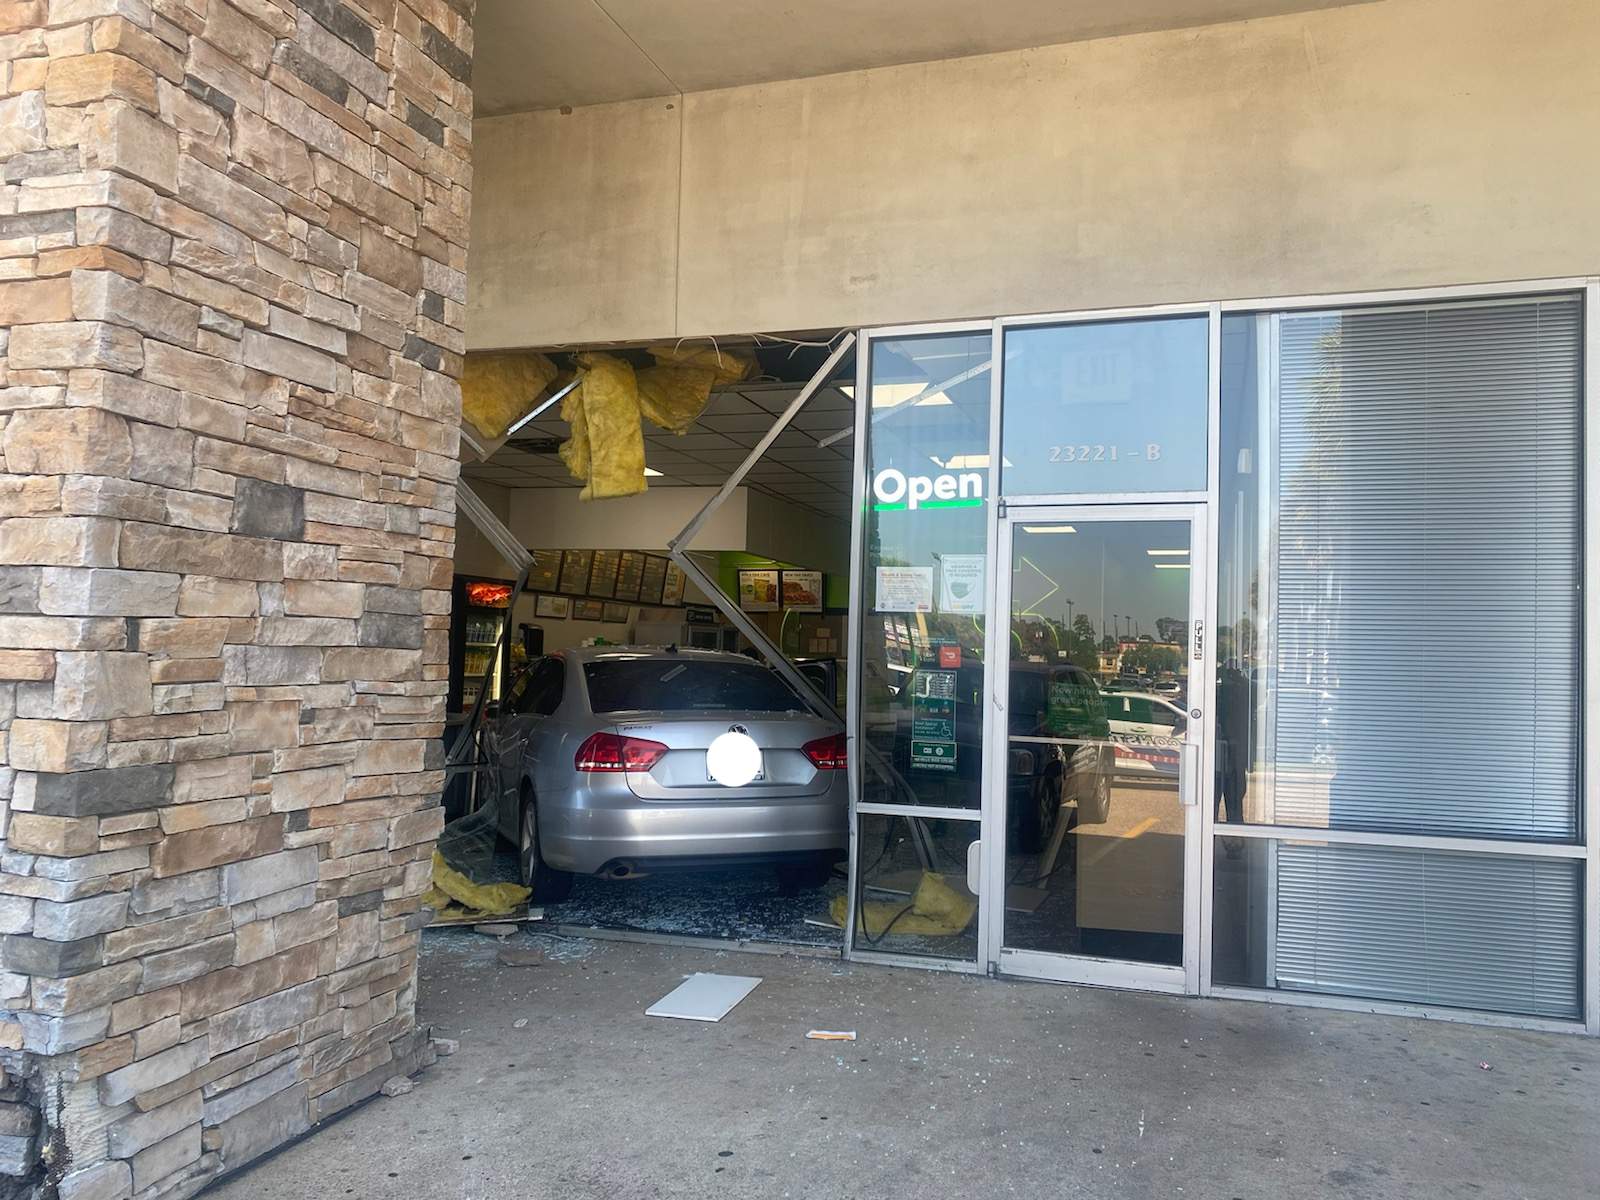 Vehicle crashes into Subway restaurant in Spring; No injuries reported